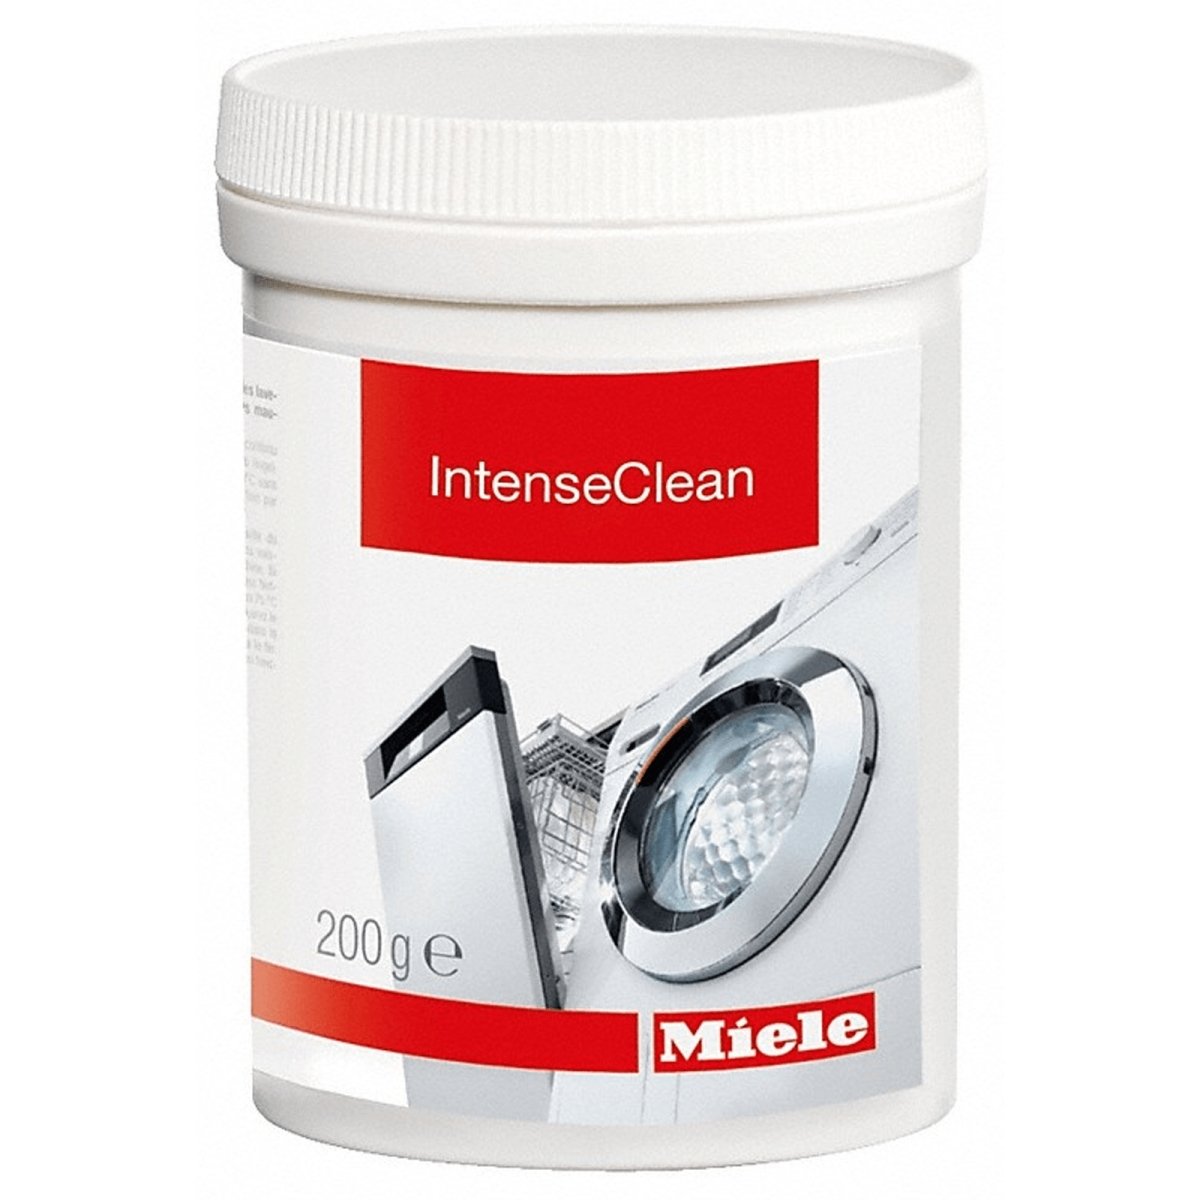 Miele 10717070 IntenseClean Dishwasher And Washing Machine Cleaner - Atlantic Electrics